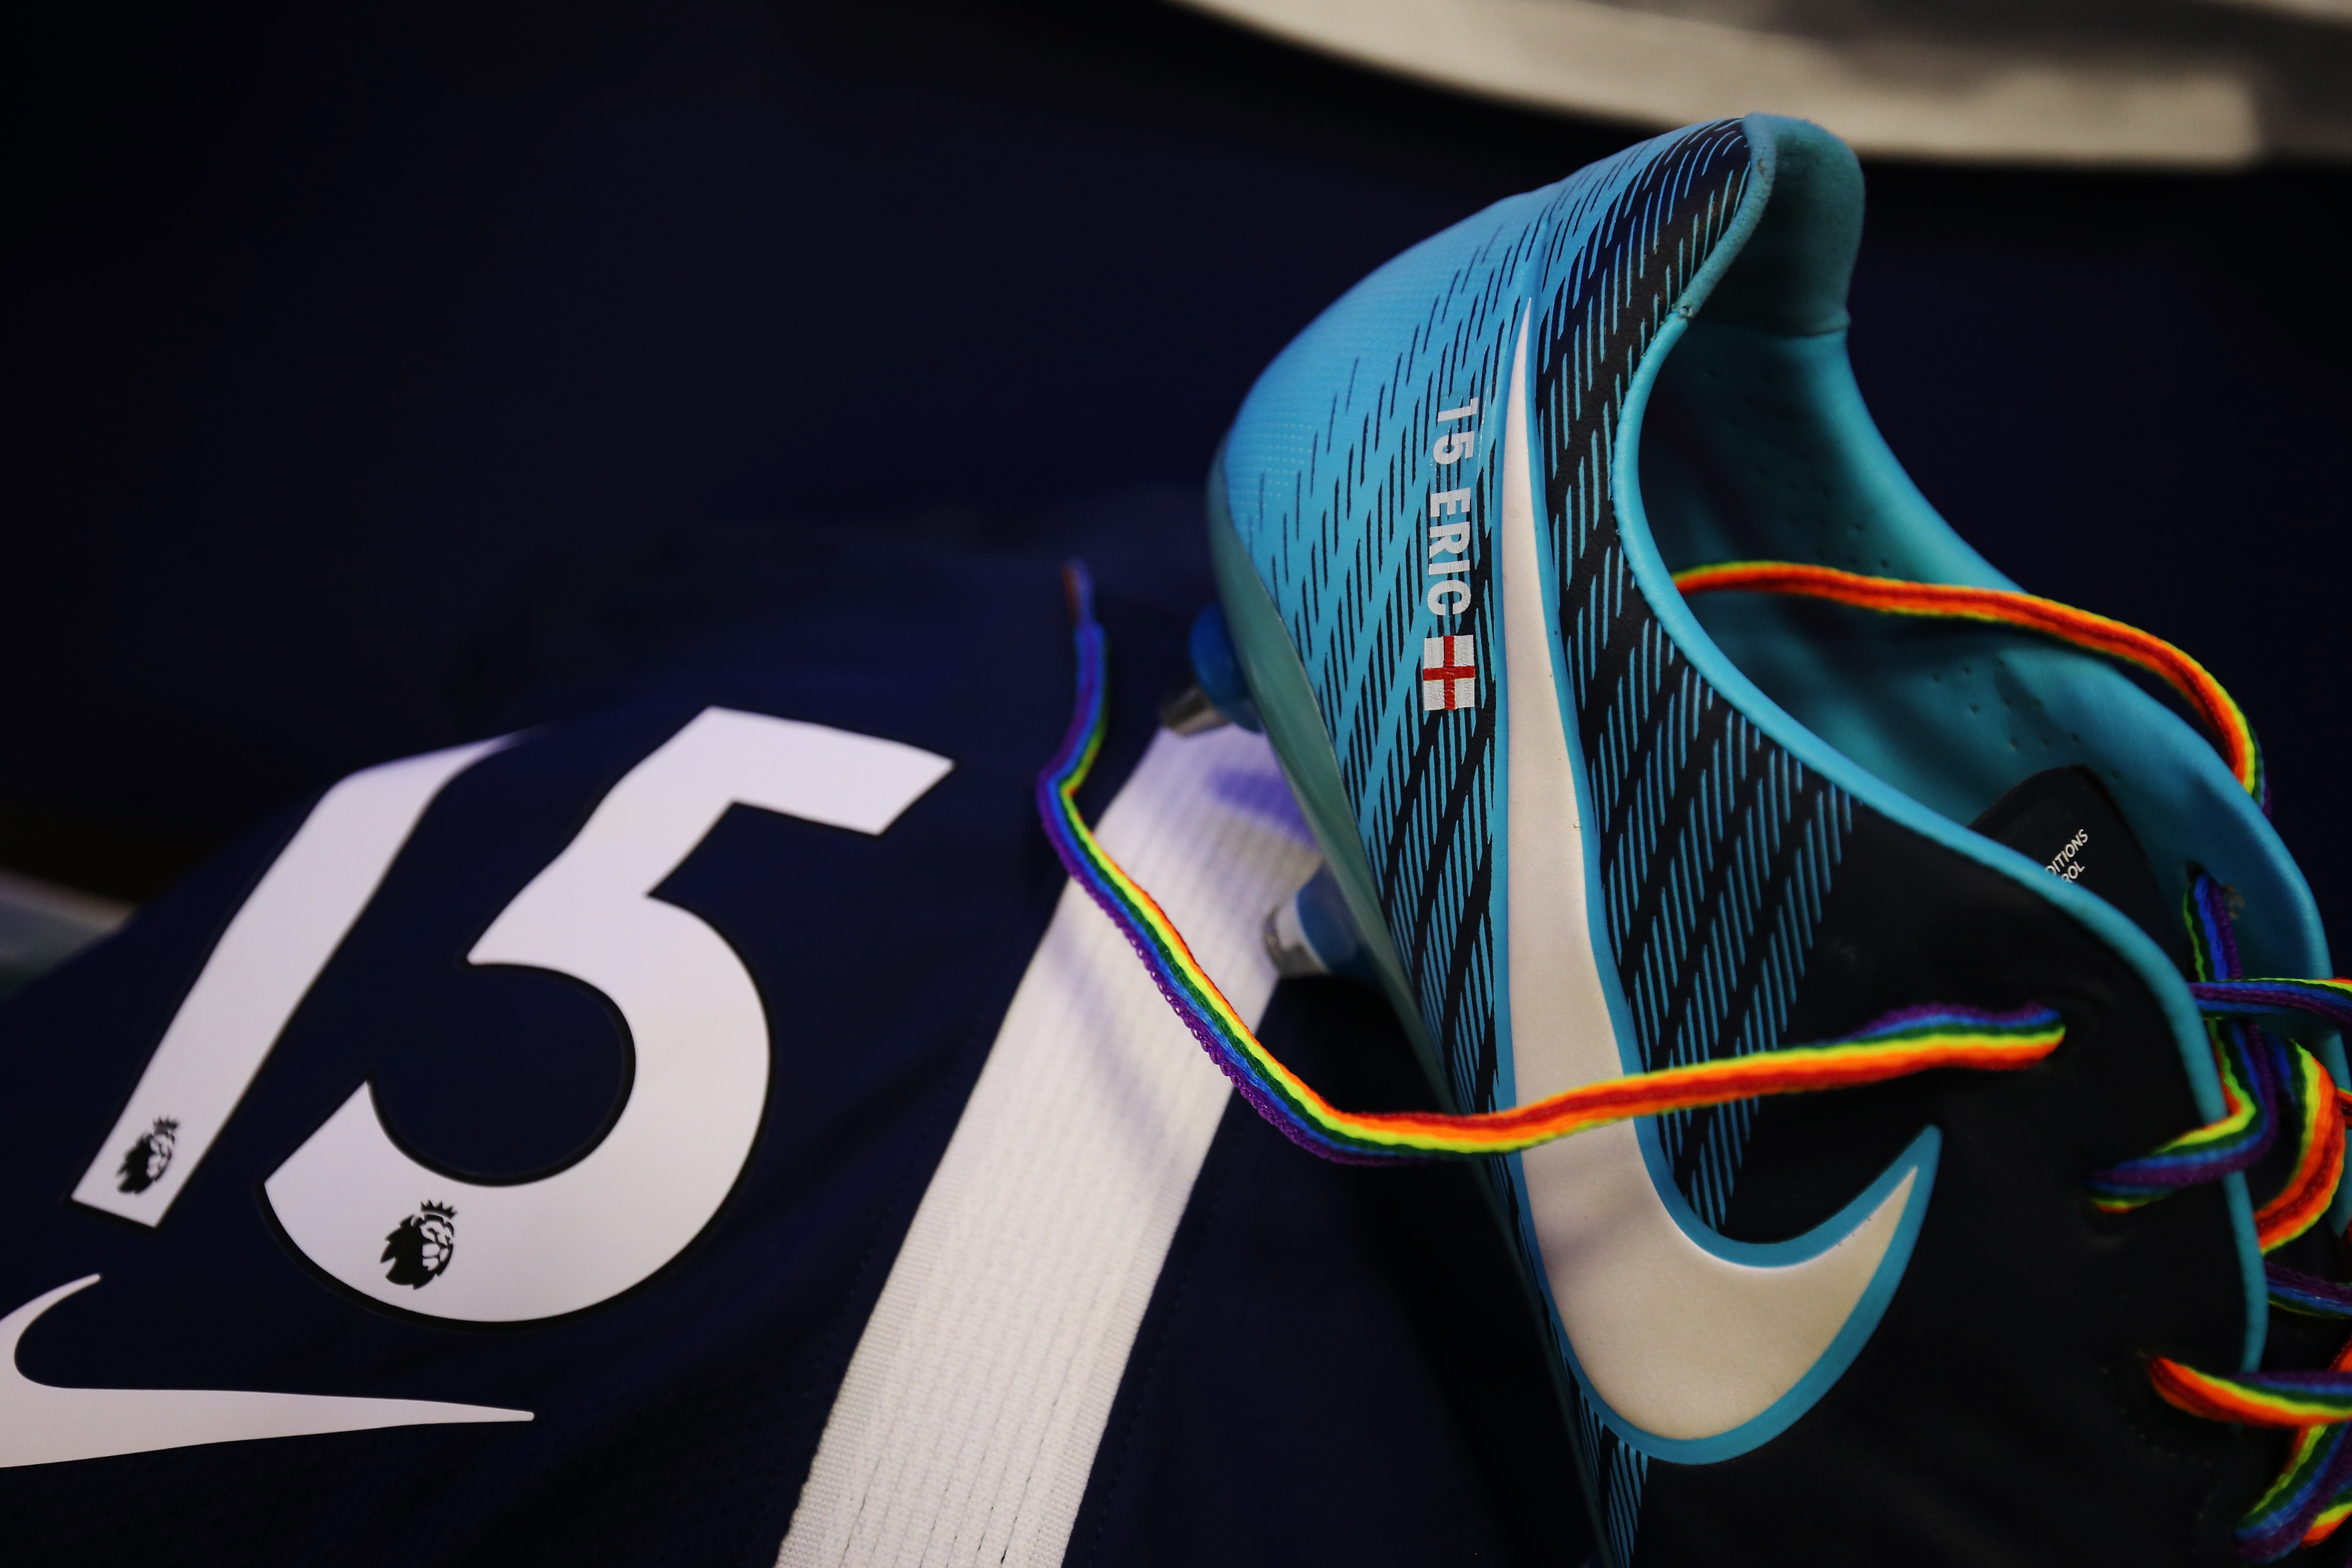 Photo displays a football boot with rainbow laces.